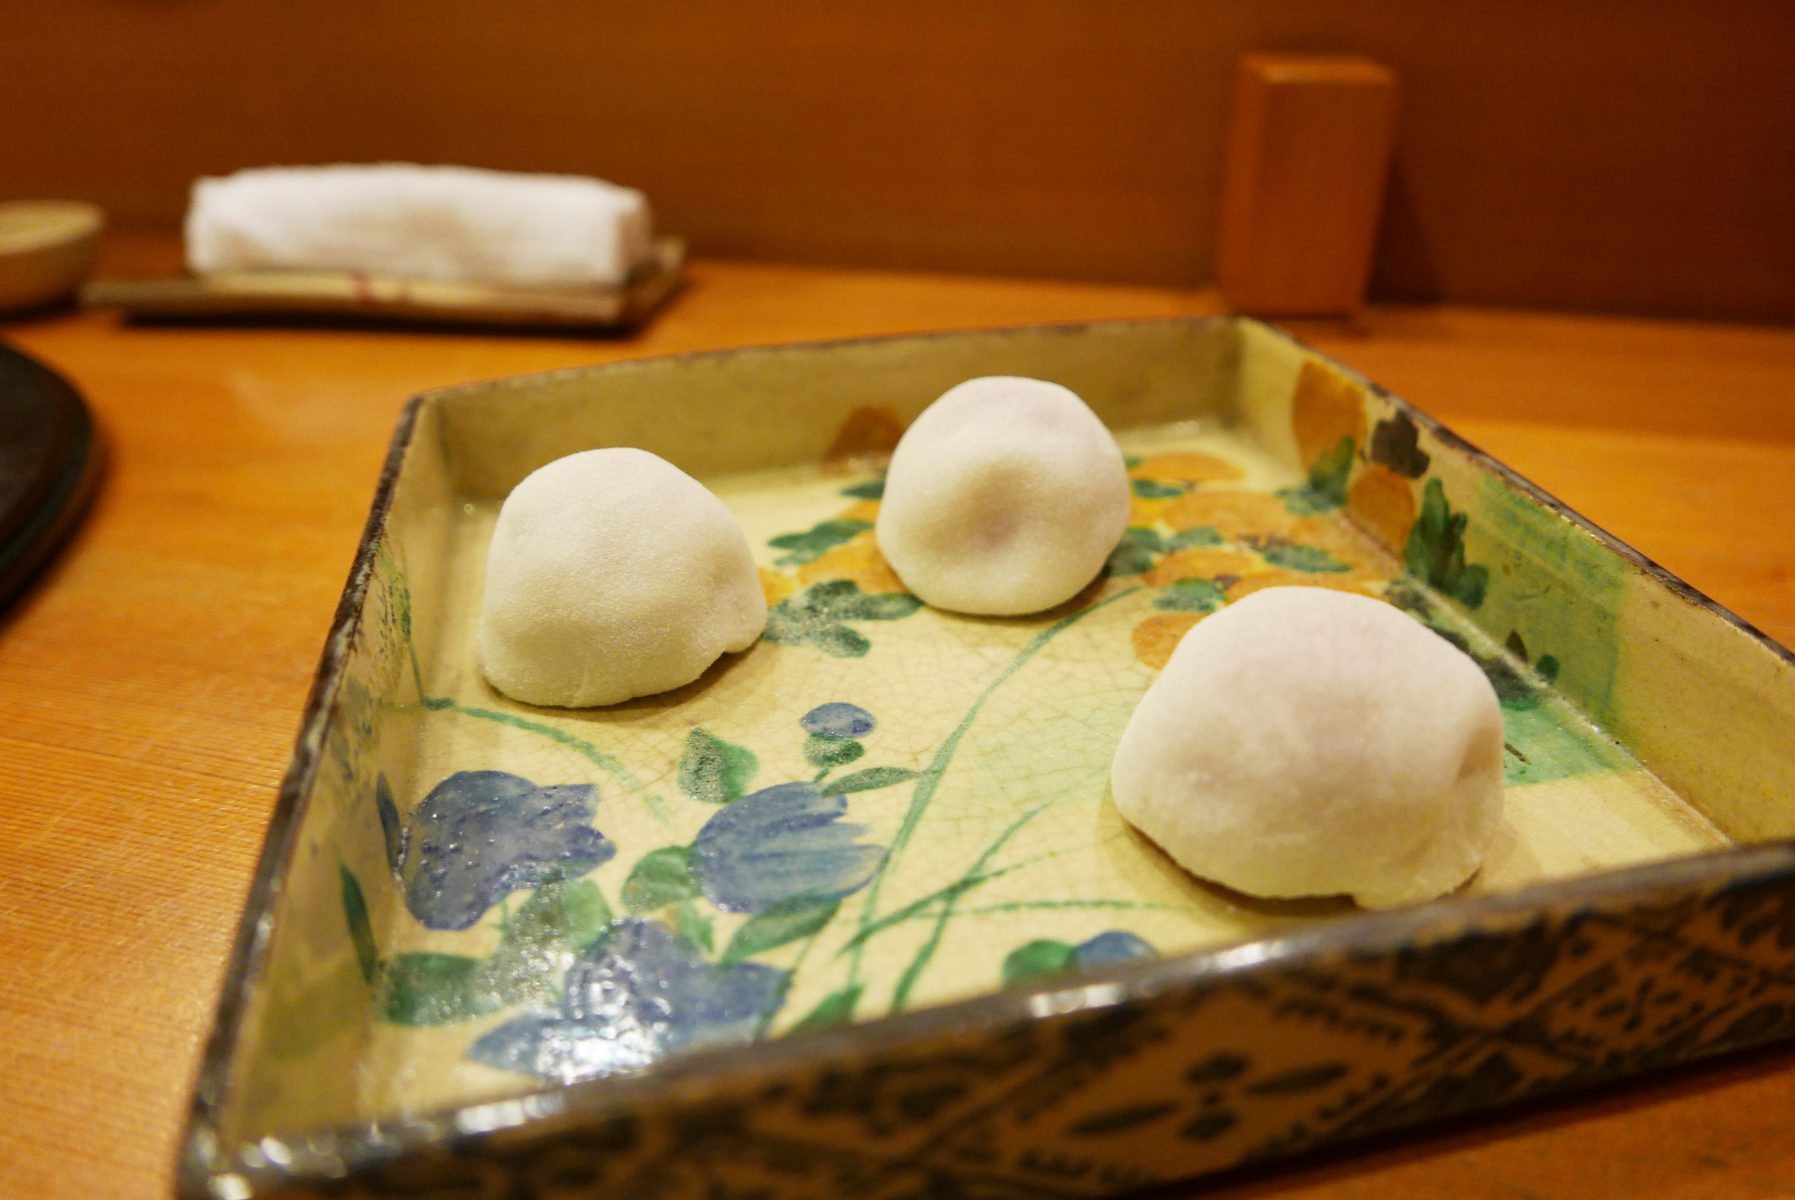 Strawberry daifuku, the best part of the meal!